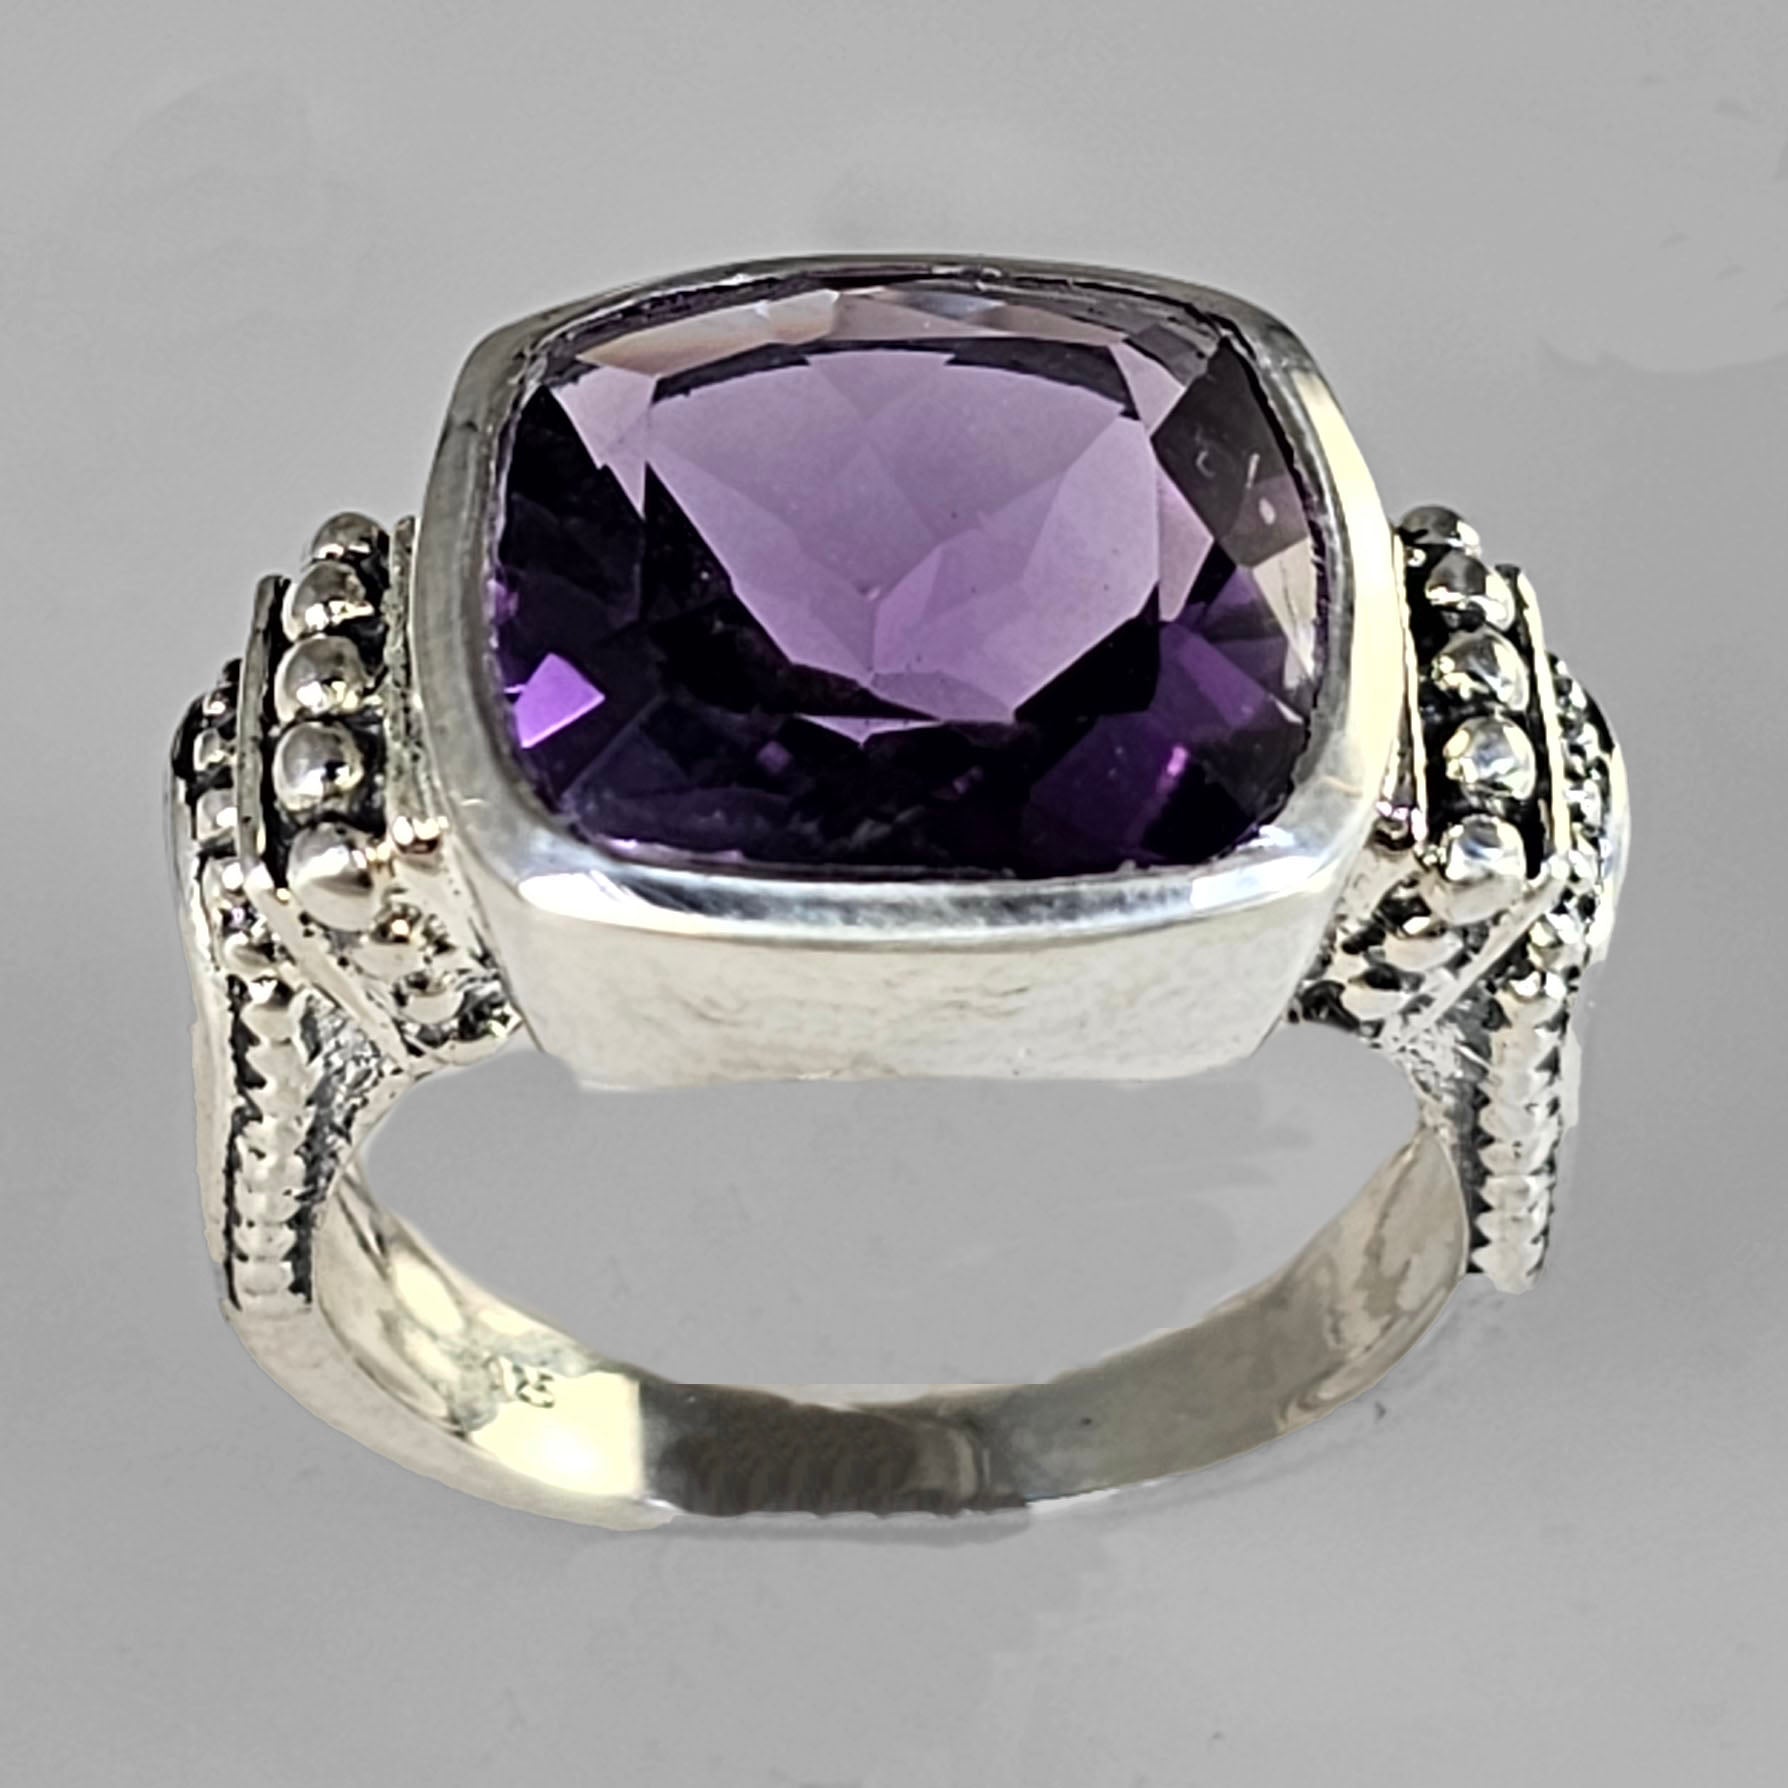 Amethyst 7 ct Antique Square Bezel Set Sterling Silver Ring, Size 8